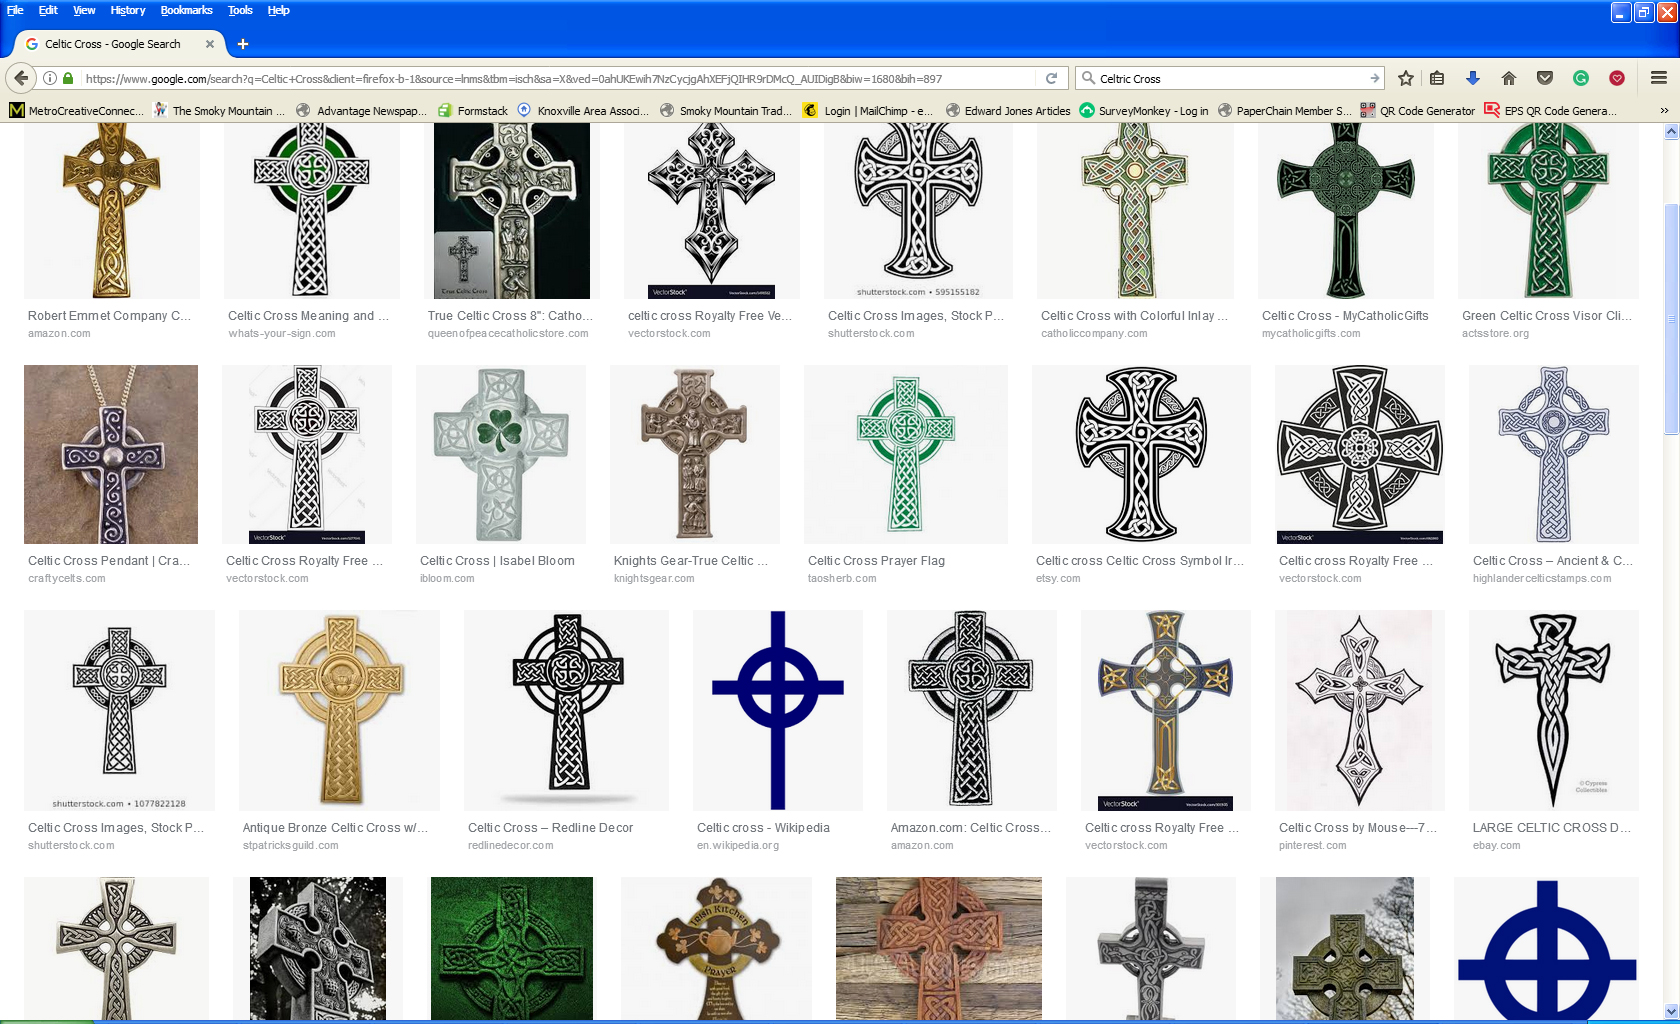 The Celtic cross is a symbol widely associated with Ireland, but many may not know the unique history and debate surrounding this unique and instantly recognizable symbol. The Celtic cross combines a cross with a circle surrounding its intersection